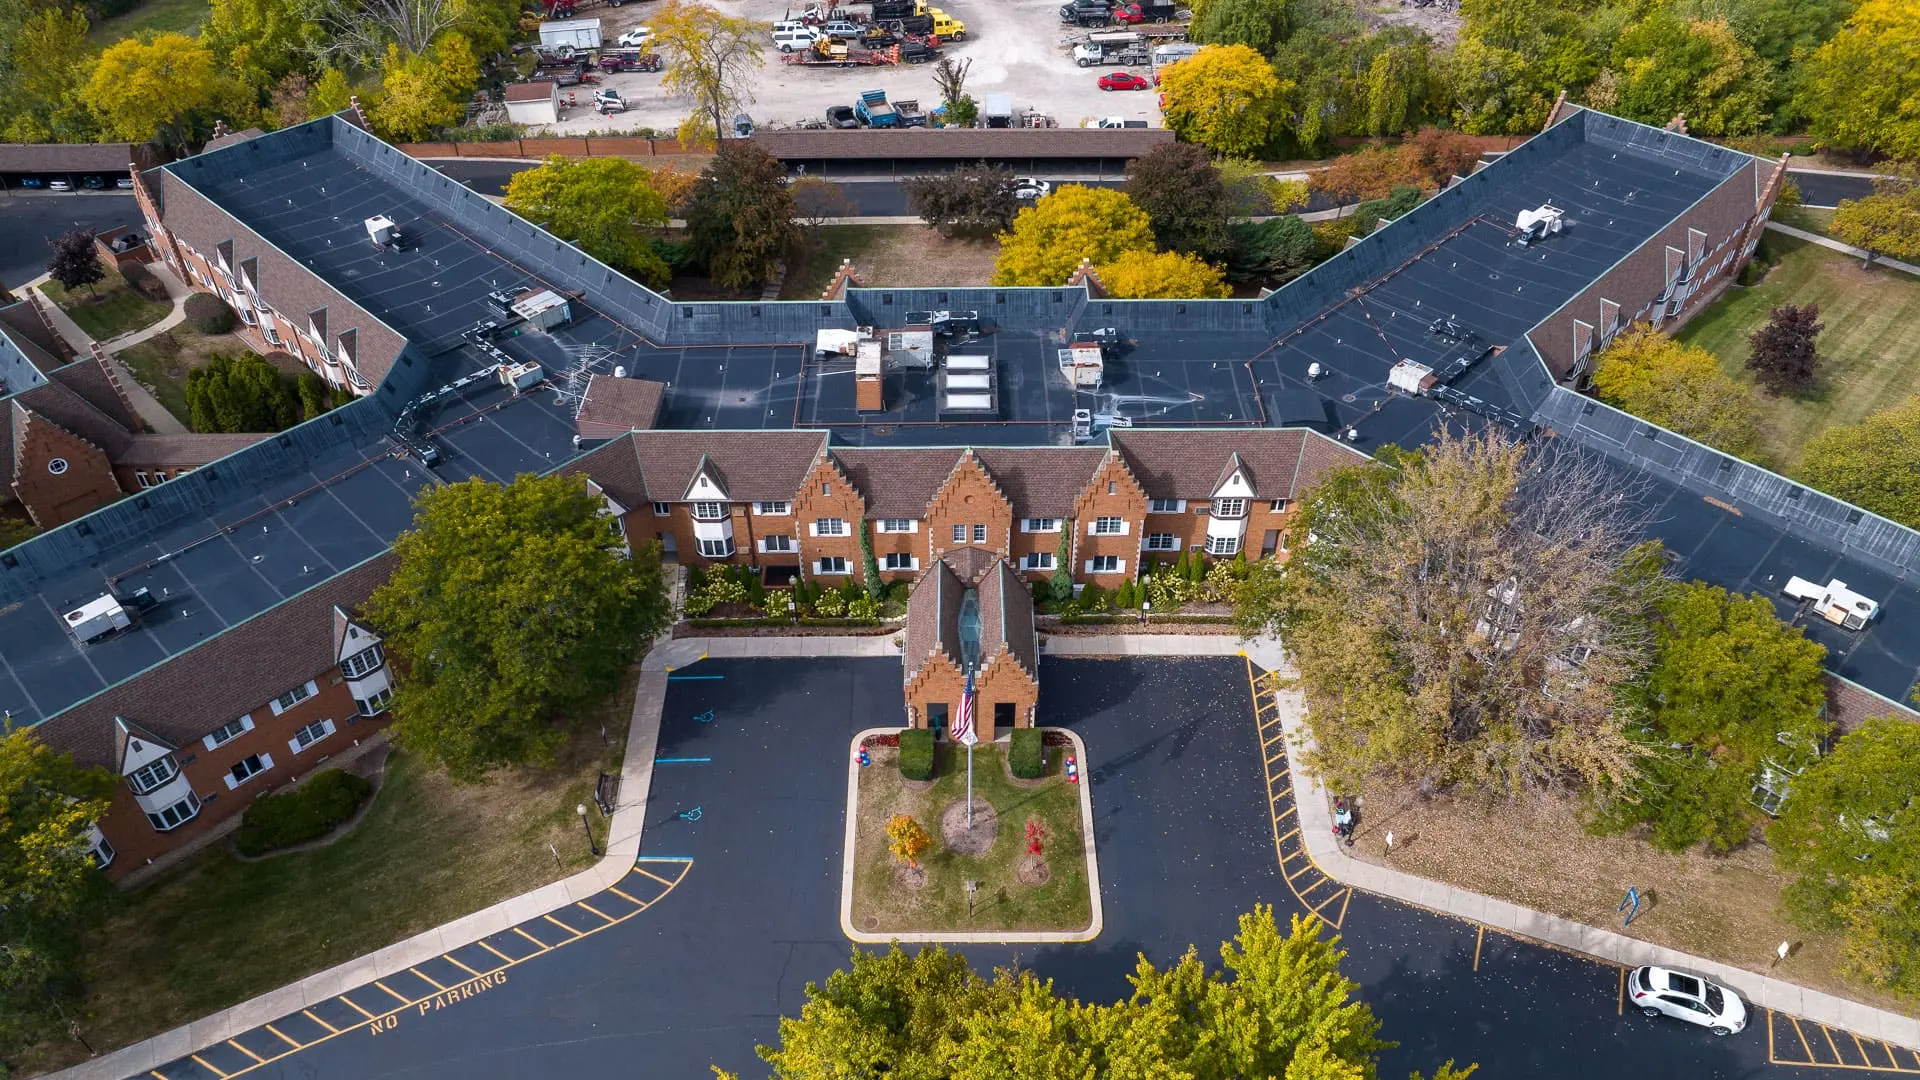 Bird's eye view of American House East I, a senior living community in Roseville, Michigan